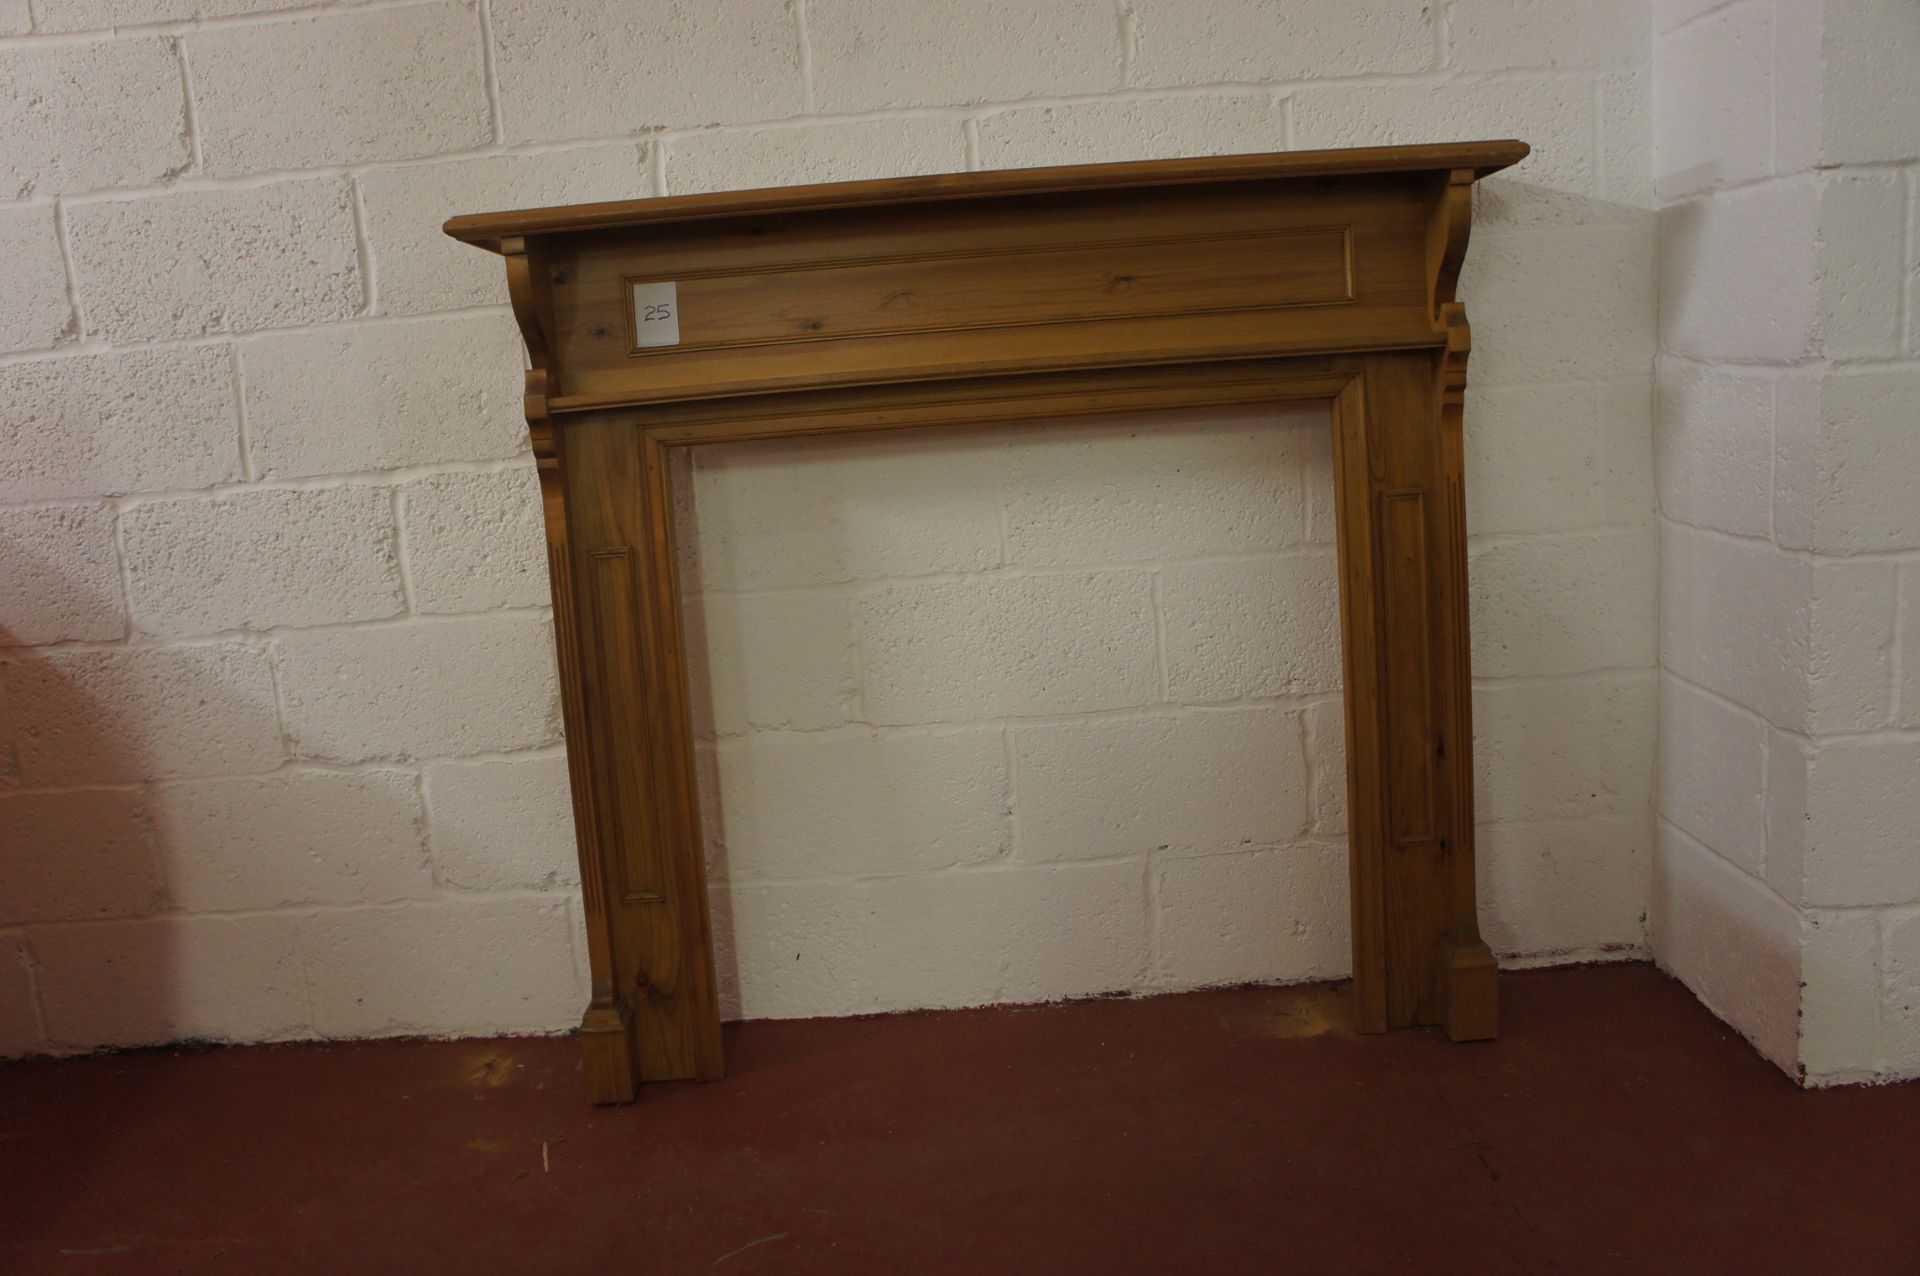 Timber fire surround